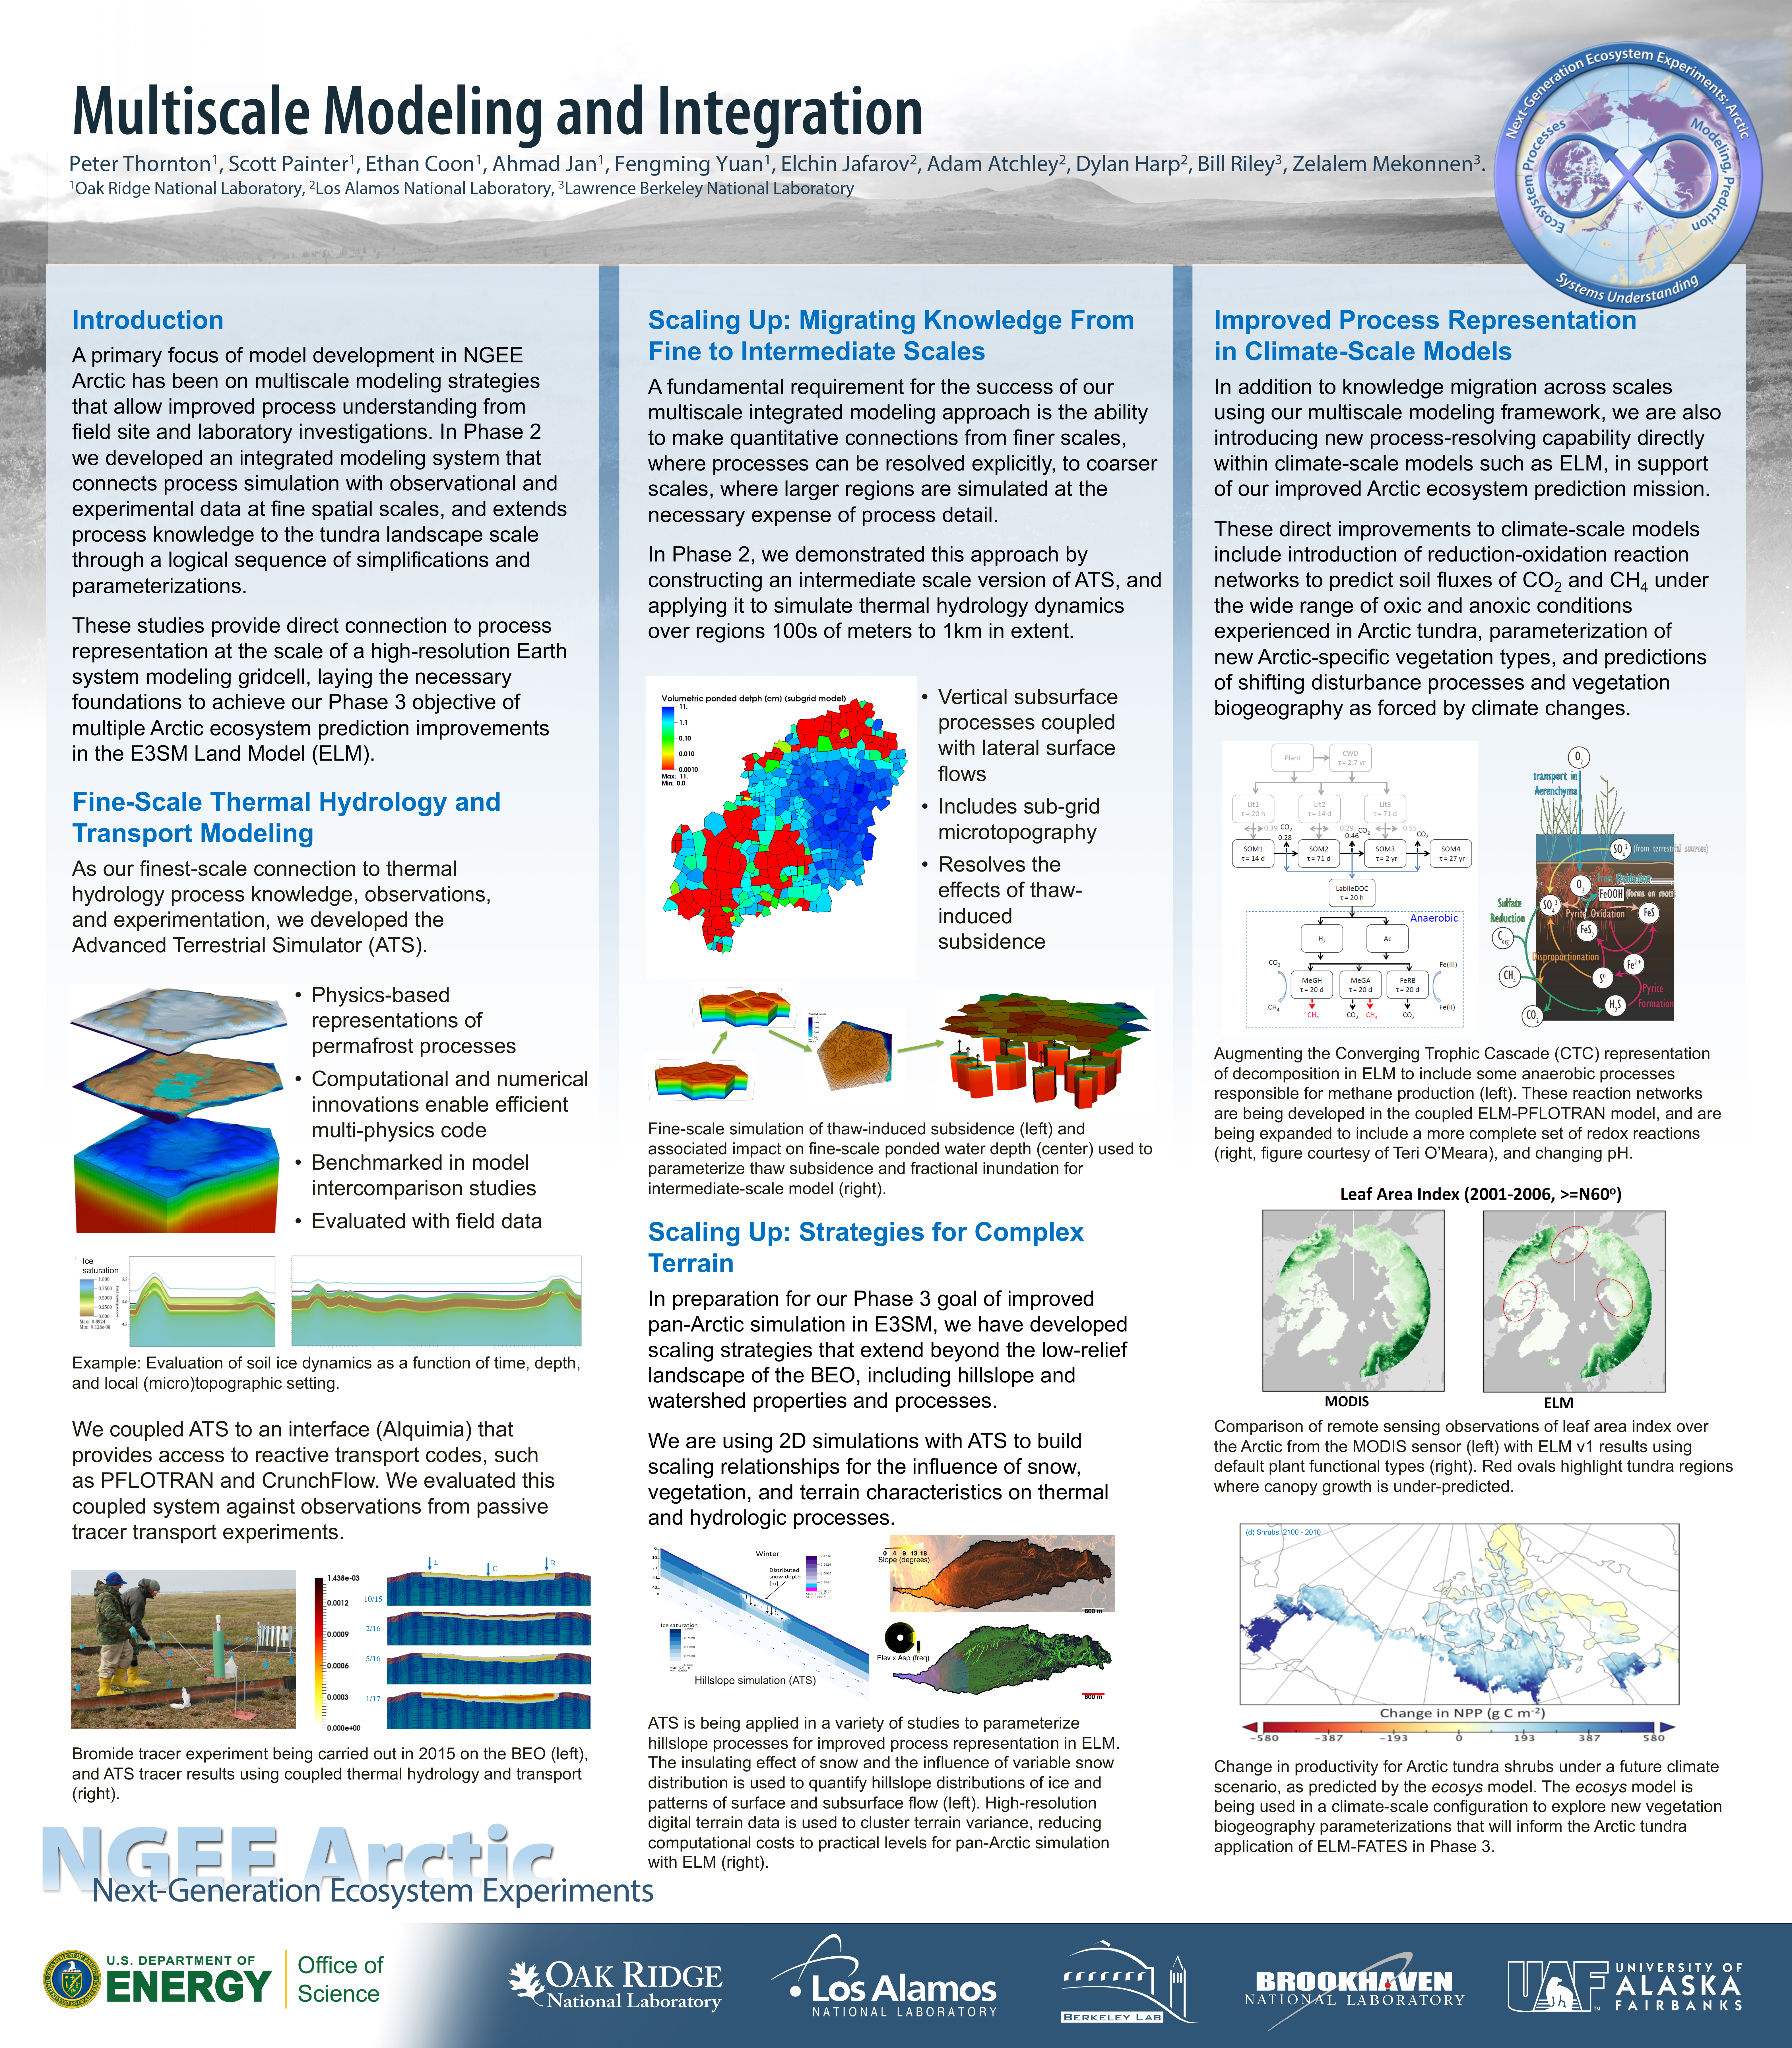 Multiscale Modeling and Integration poster